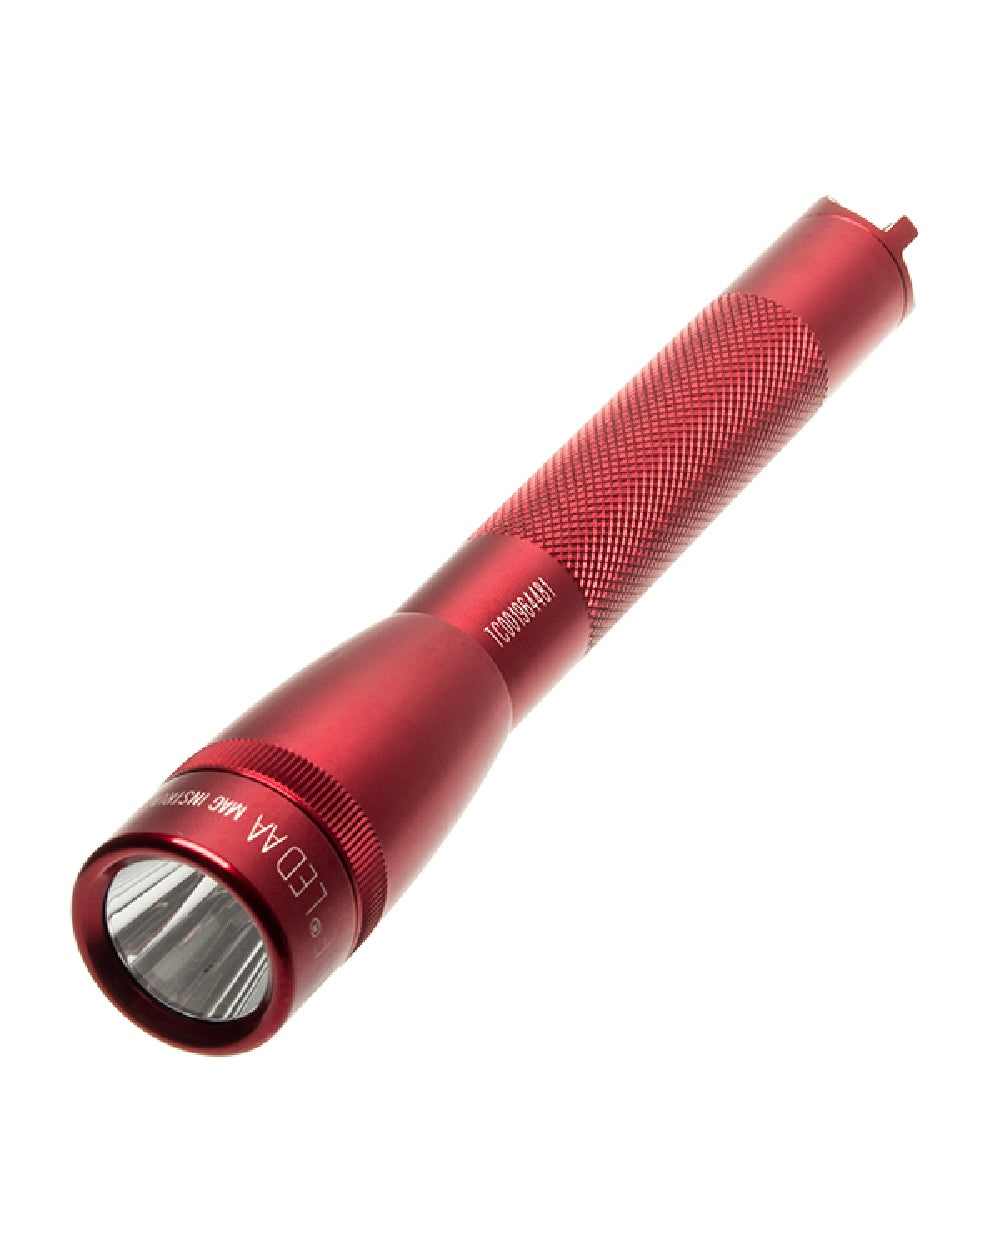 Maglite Mini 2-Cell AA LED Torch in Red 